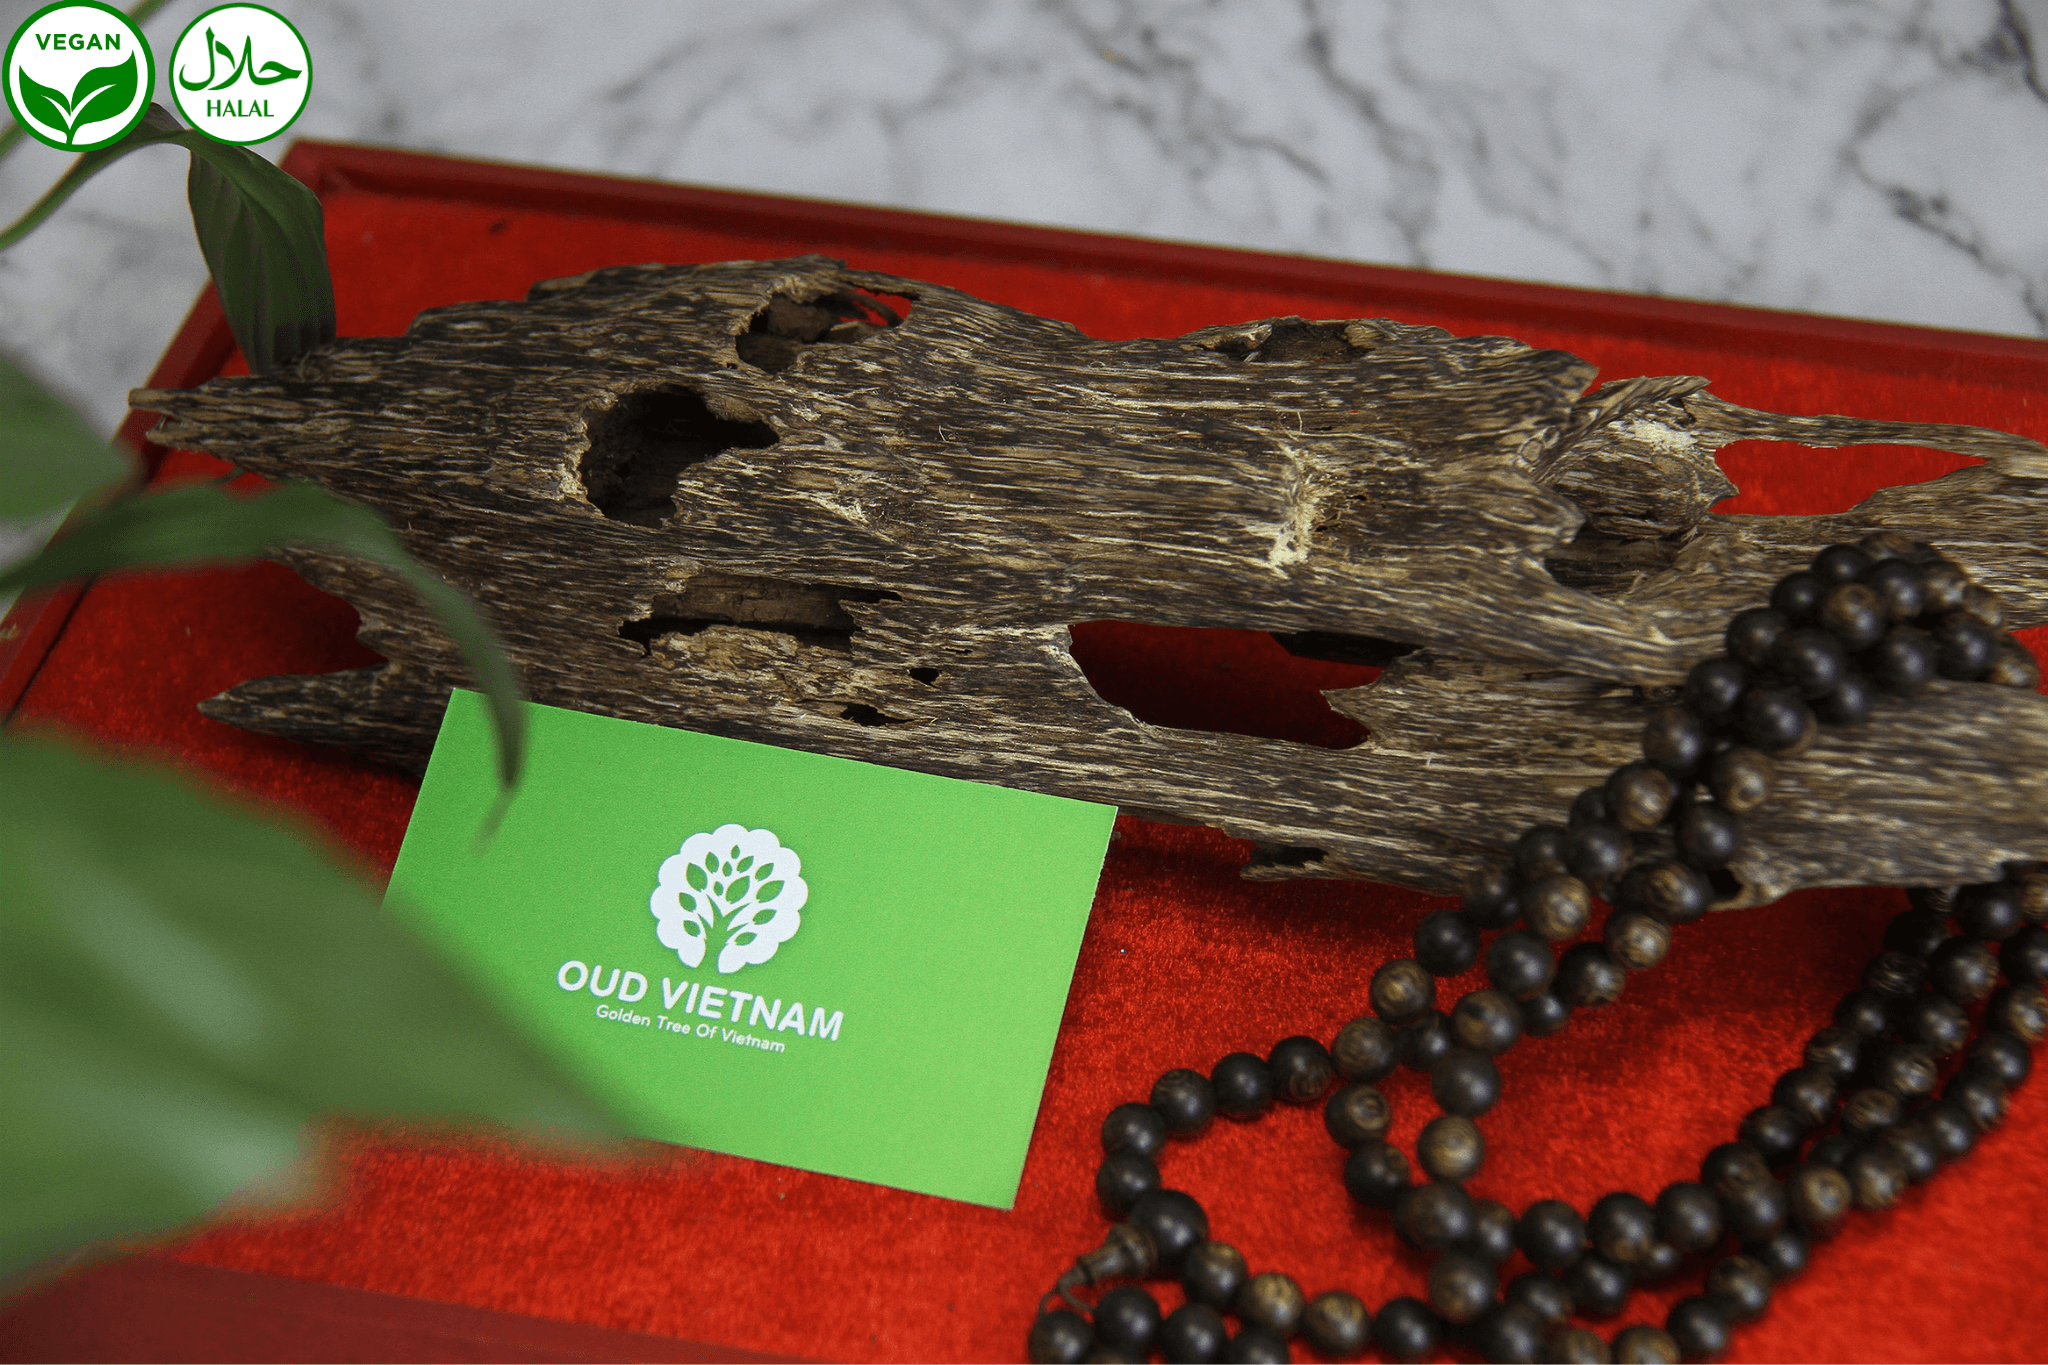 <strong>Oud Vietnam and the Journey of Producing Agarwood to Global Trademark Standards</strong>